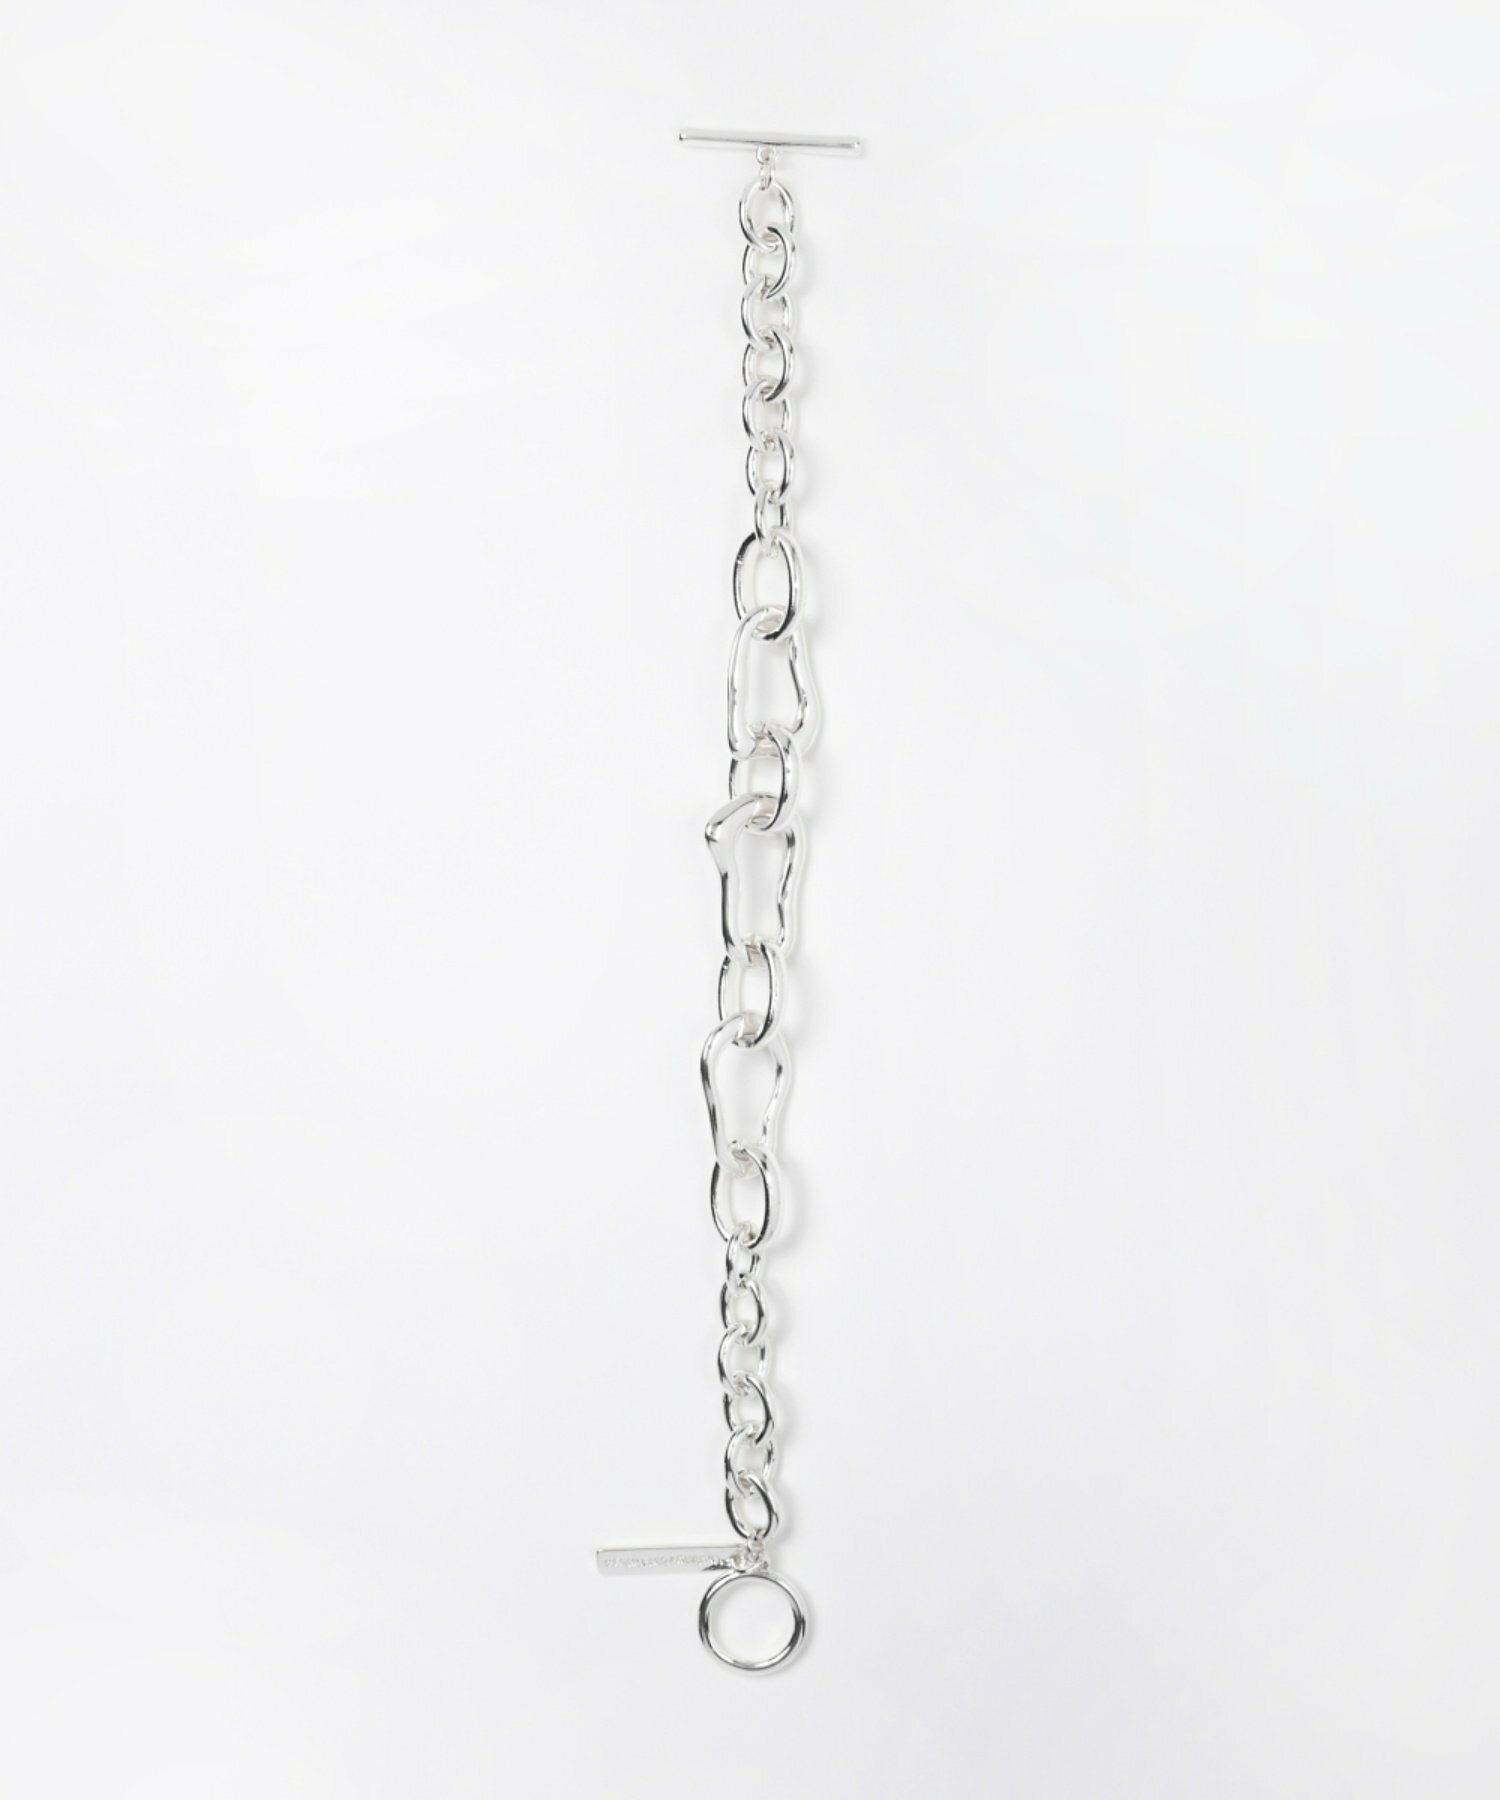 Nothing And Others/UN Combination Bracelet